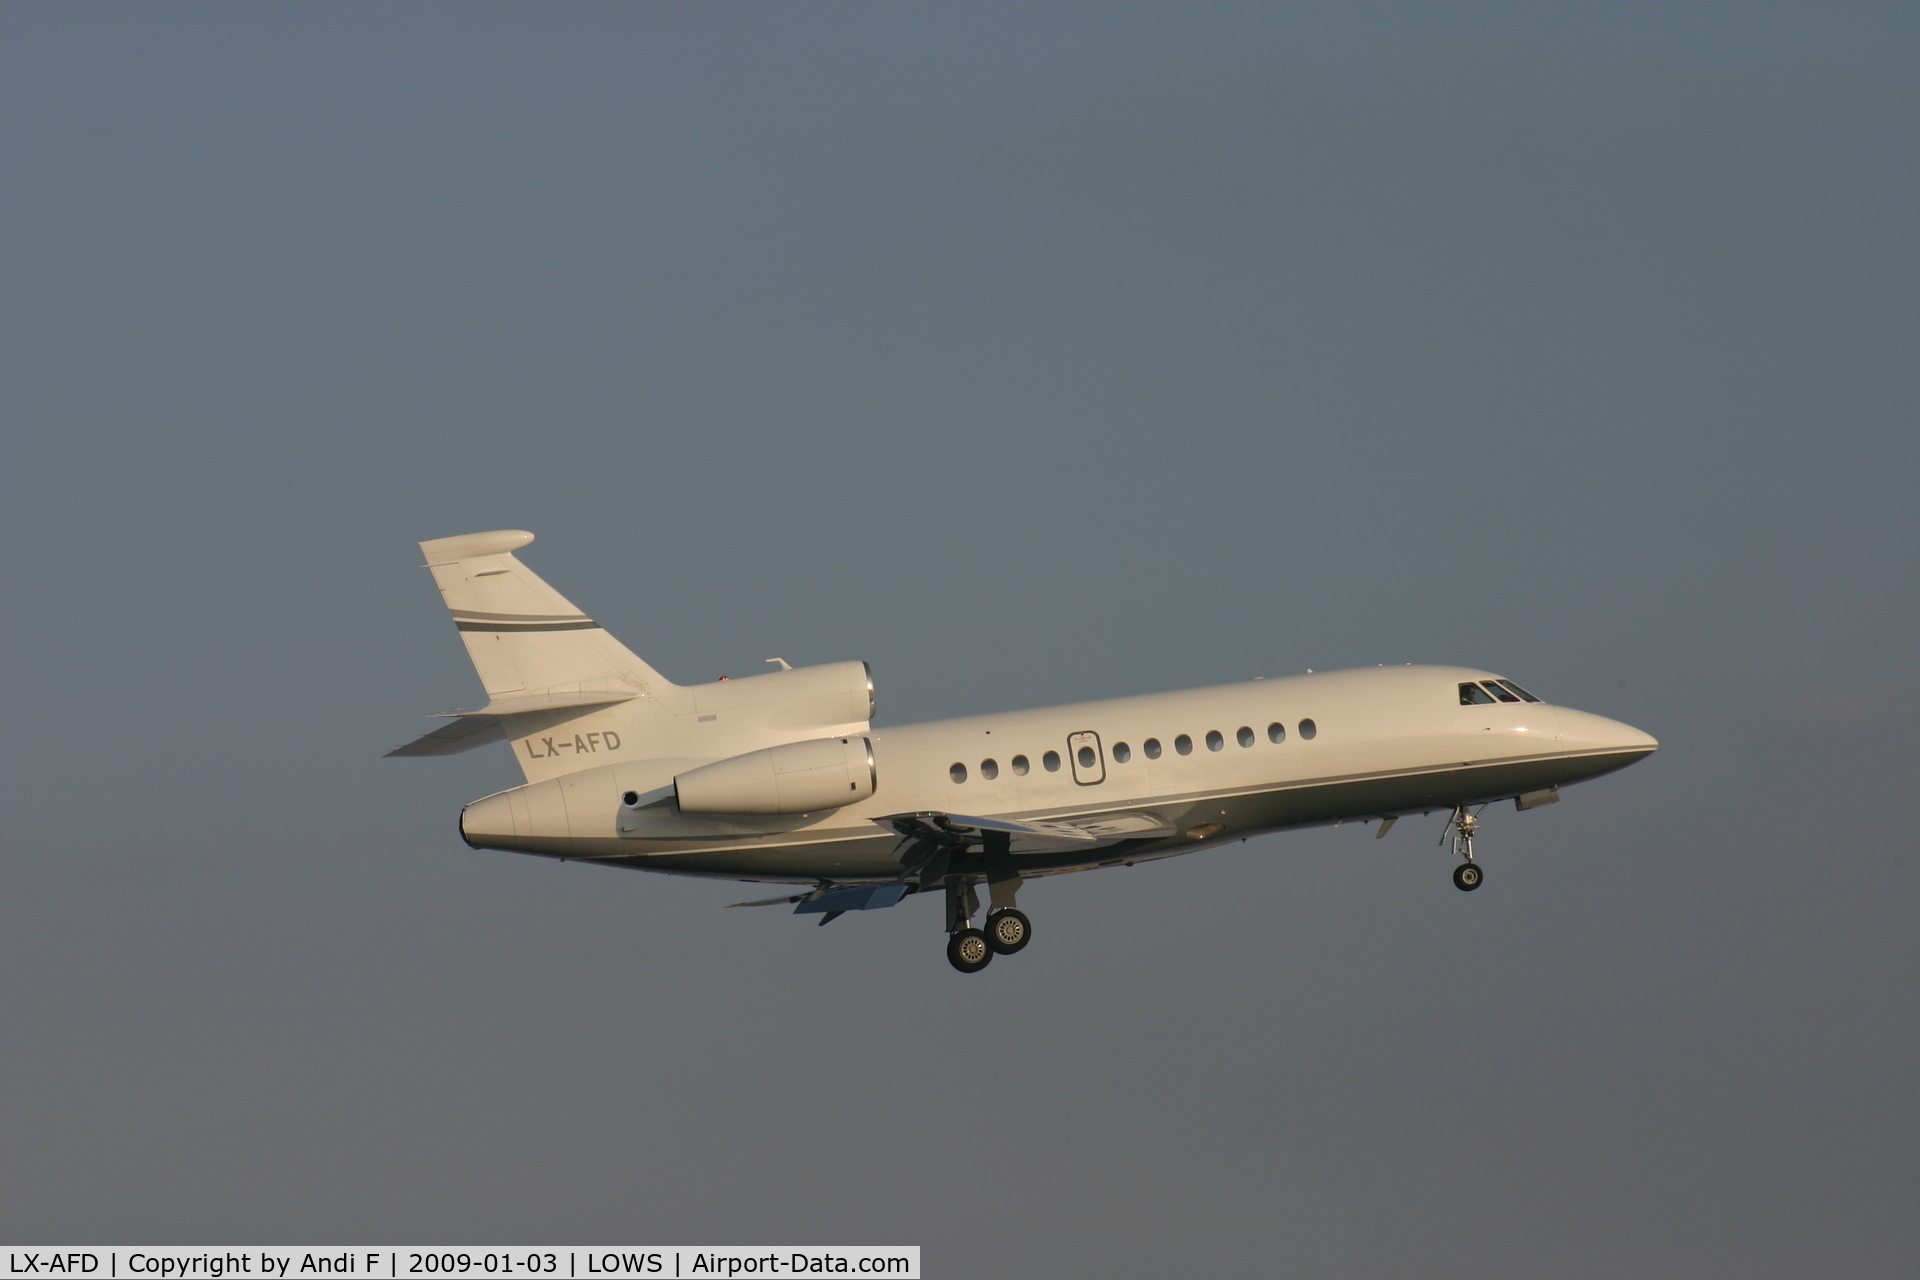 LX-AFD, 2007 Dassault Falcon 900DX C/N 615, Global Jet Luxembourg Dassault Falcon 900DX